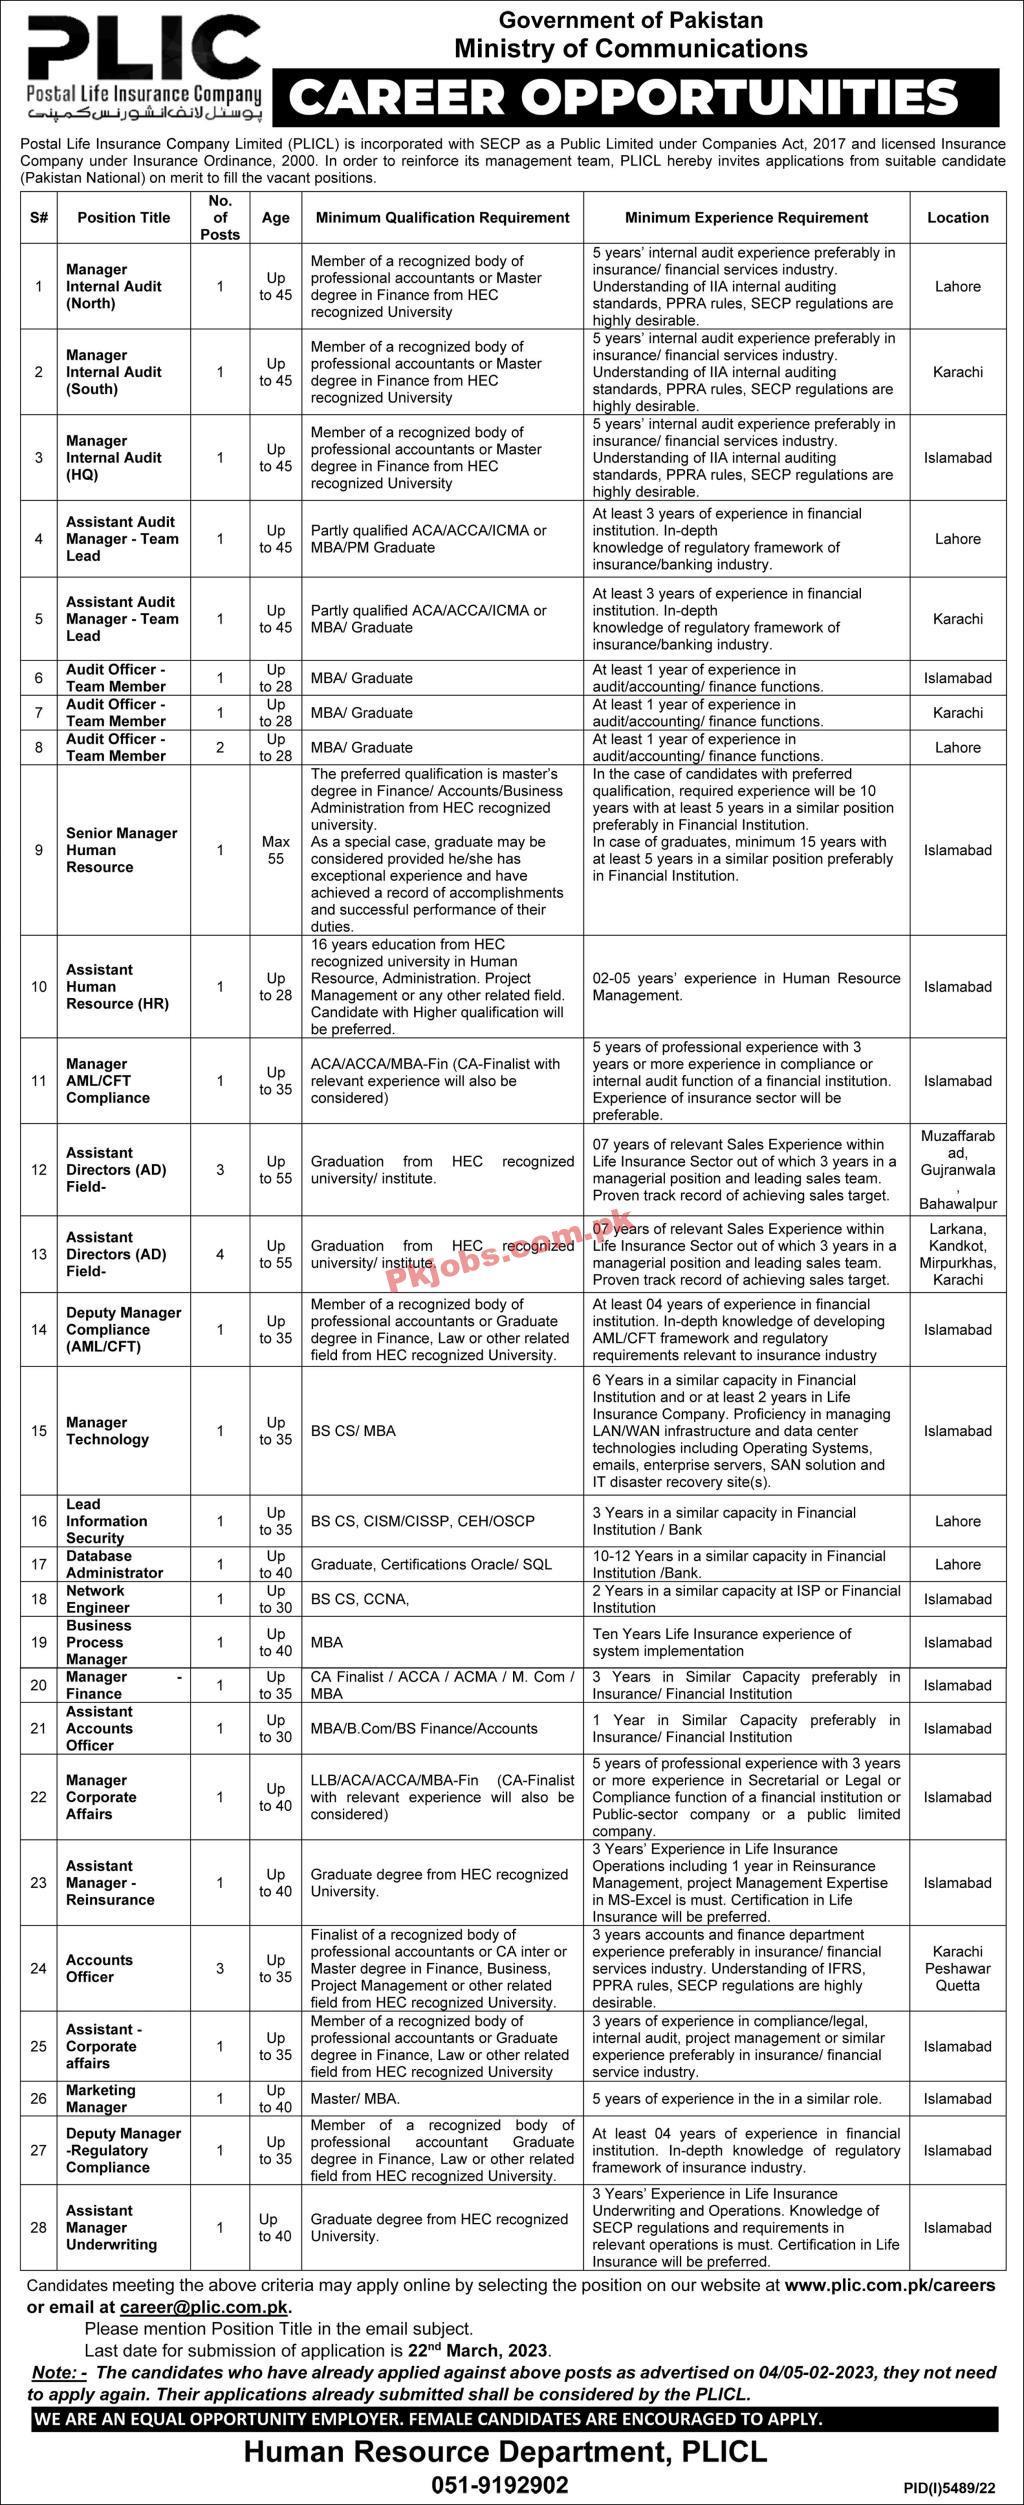 Jobs in Government of Pakistan Ministry of Communications